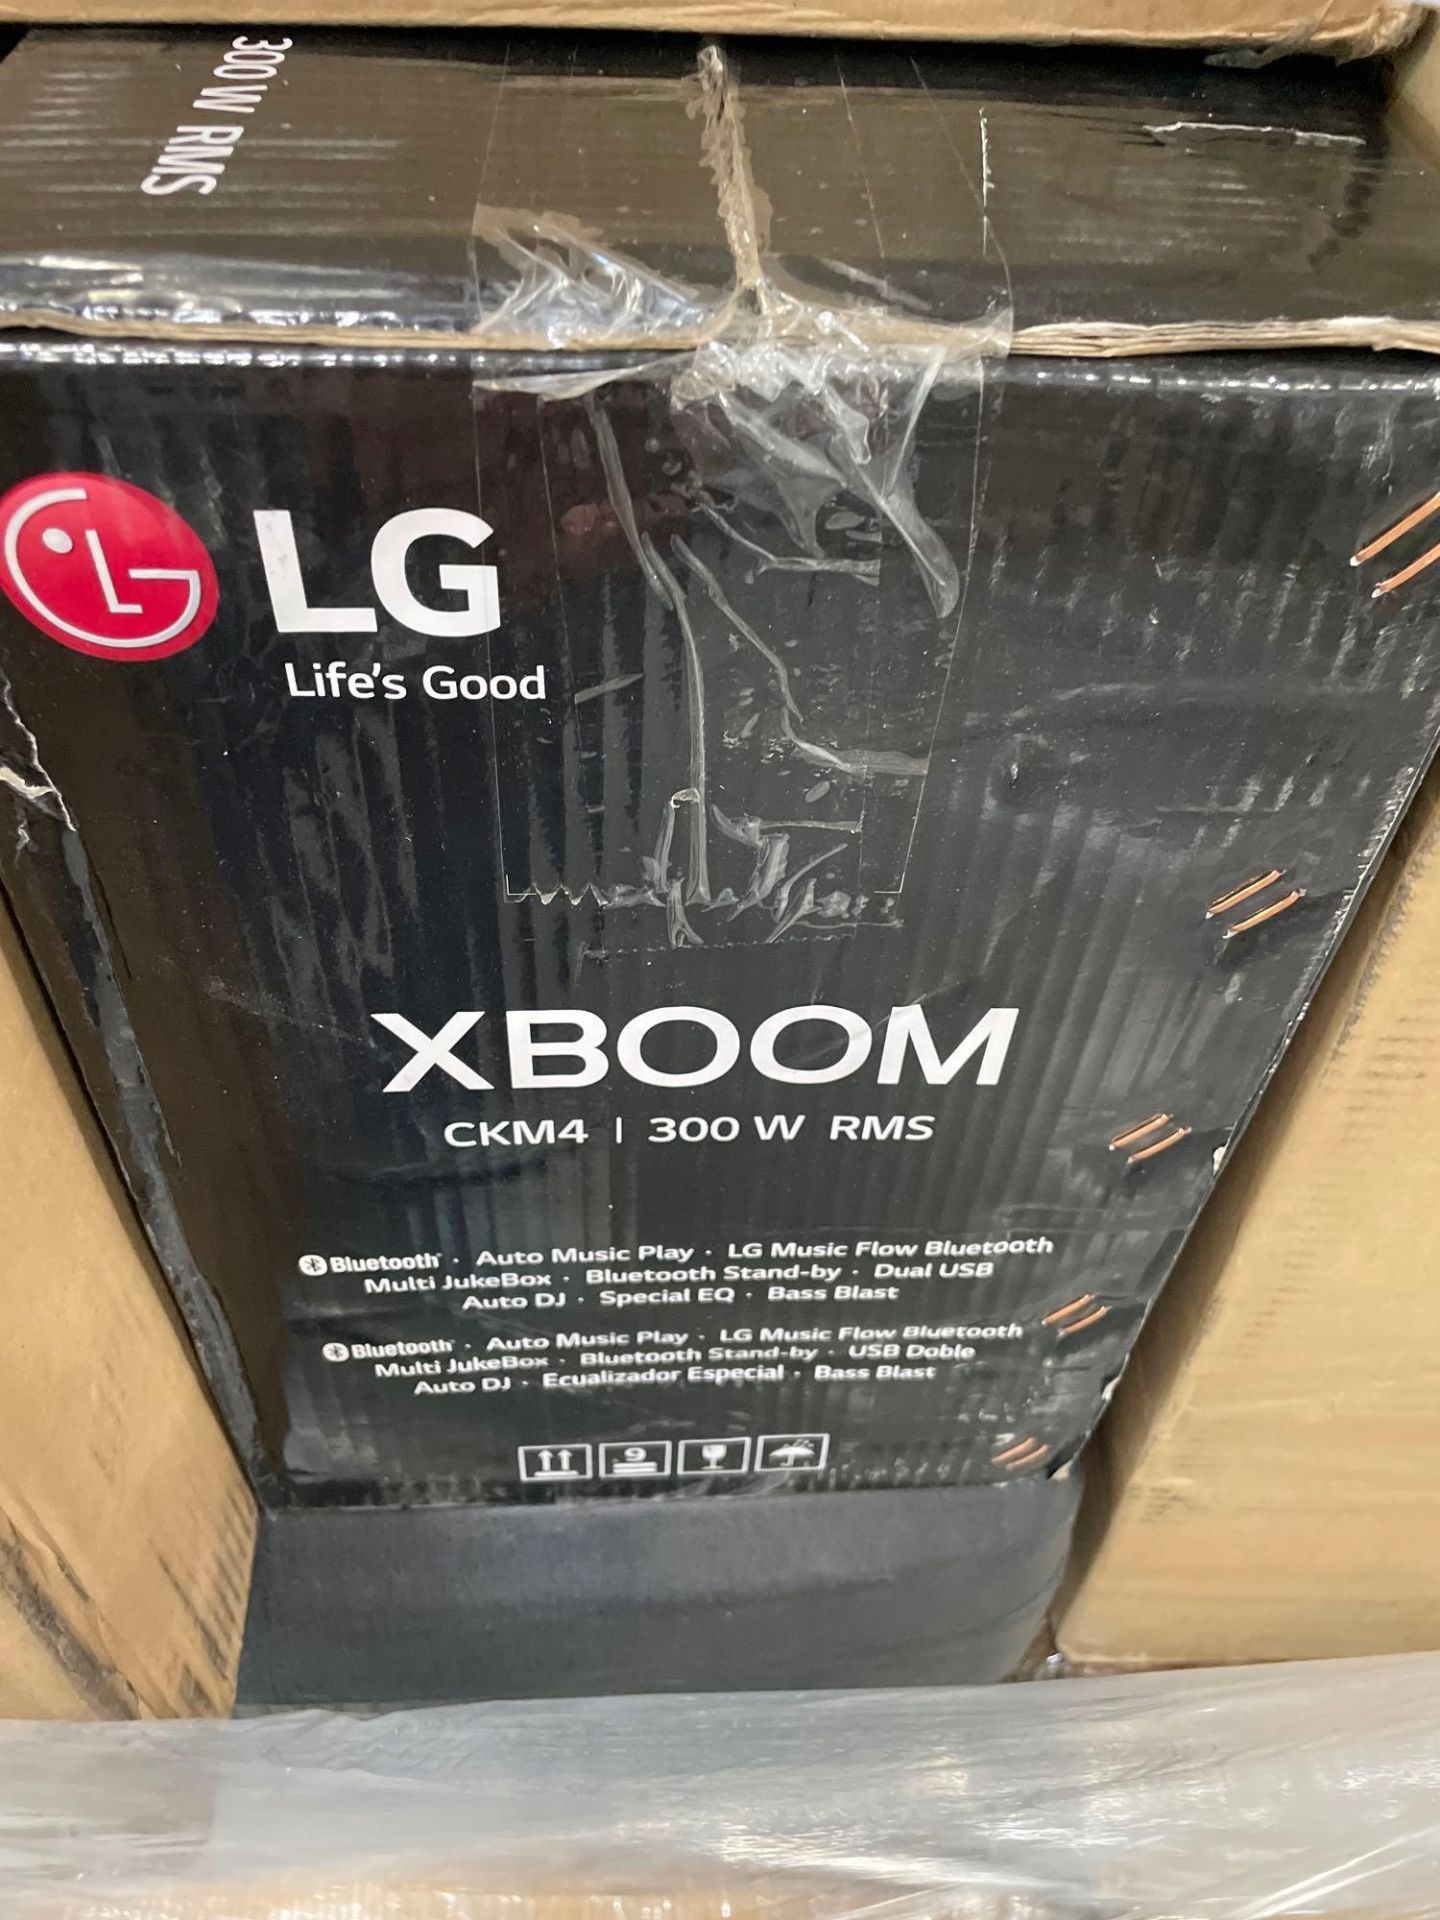 LG xboom, and more - Image 2 of 8